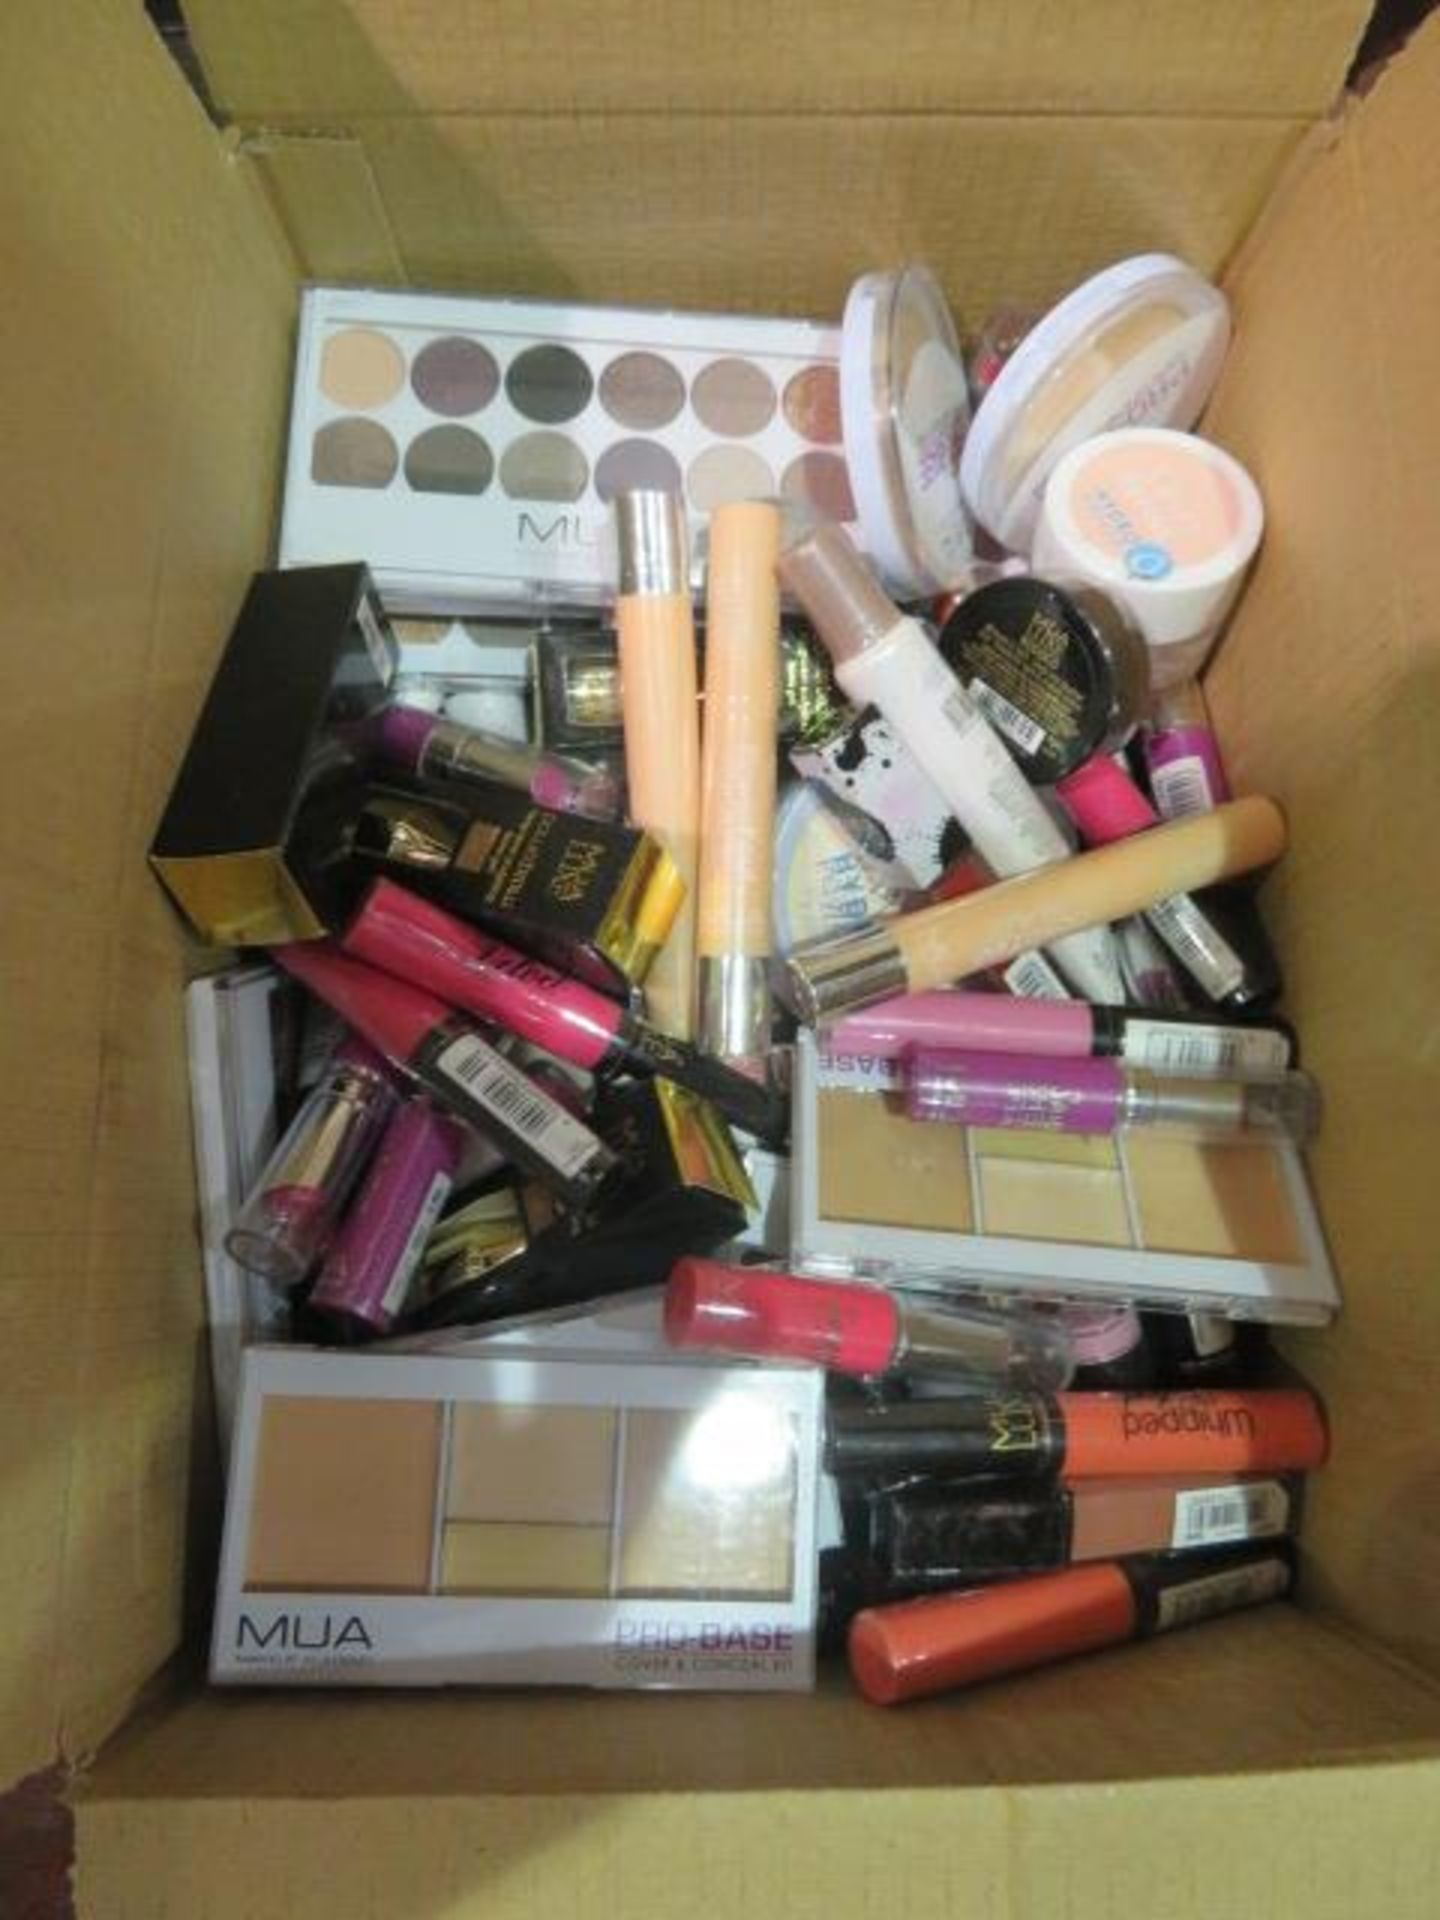 Circa. 200 items of various new make up acadamy make up to include: whipped blush, skin define hydro